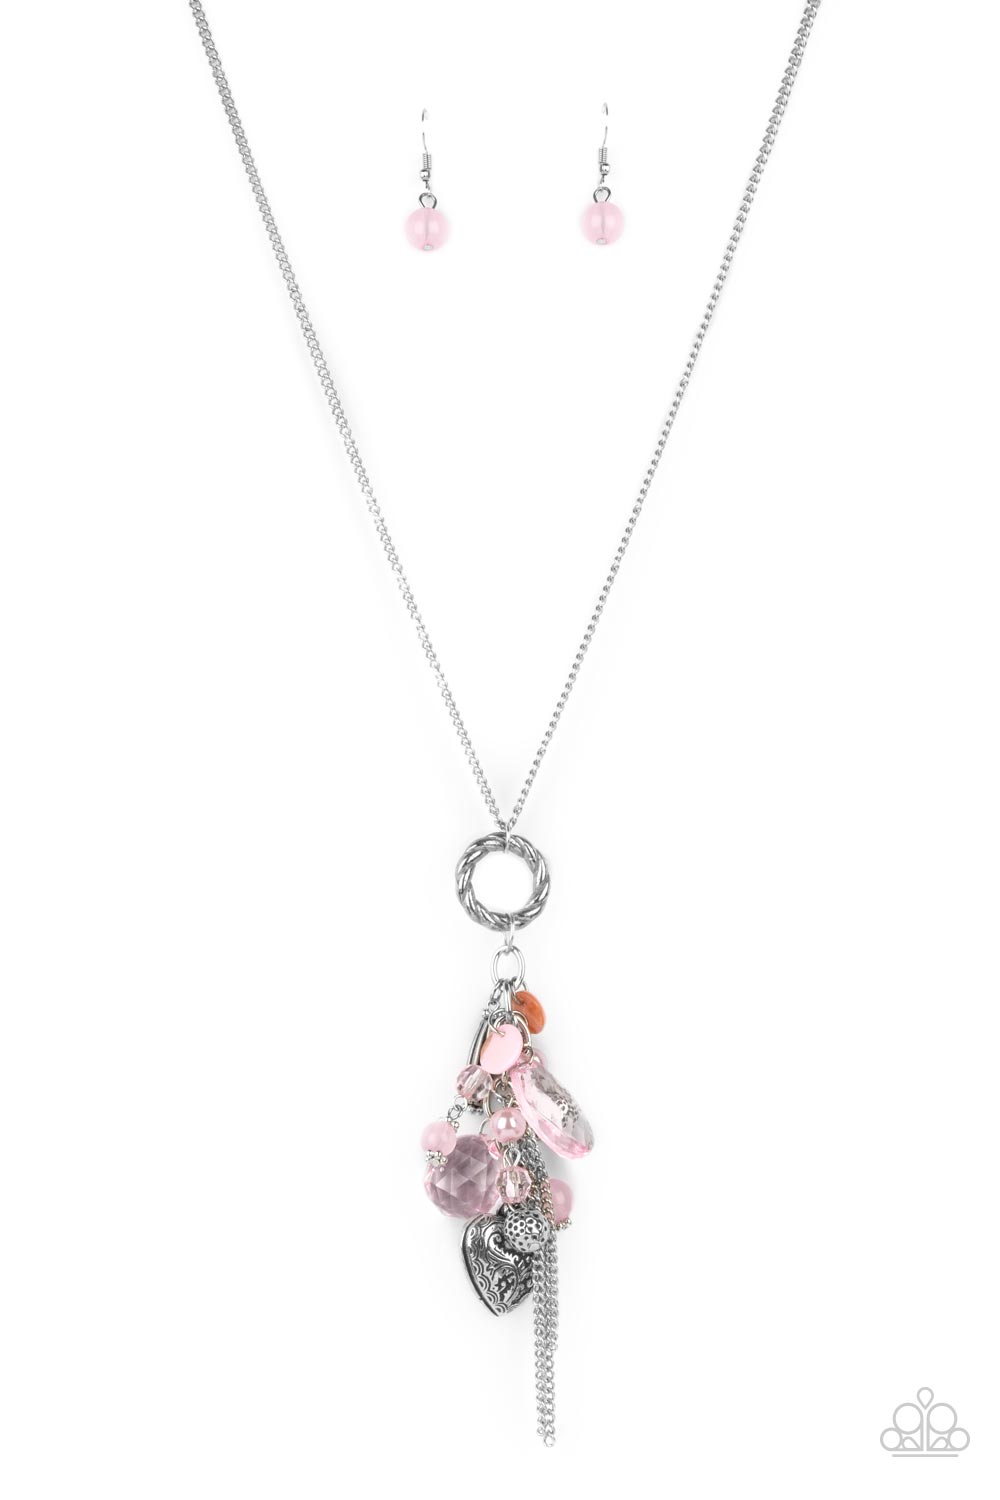 AMOR TO LOVE PINK-NECKLACE